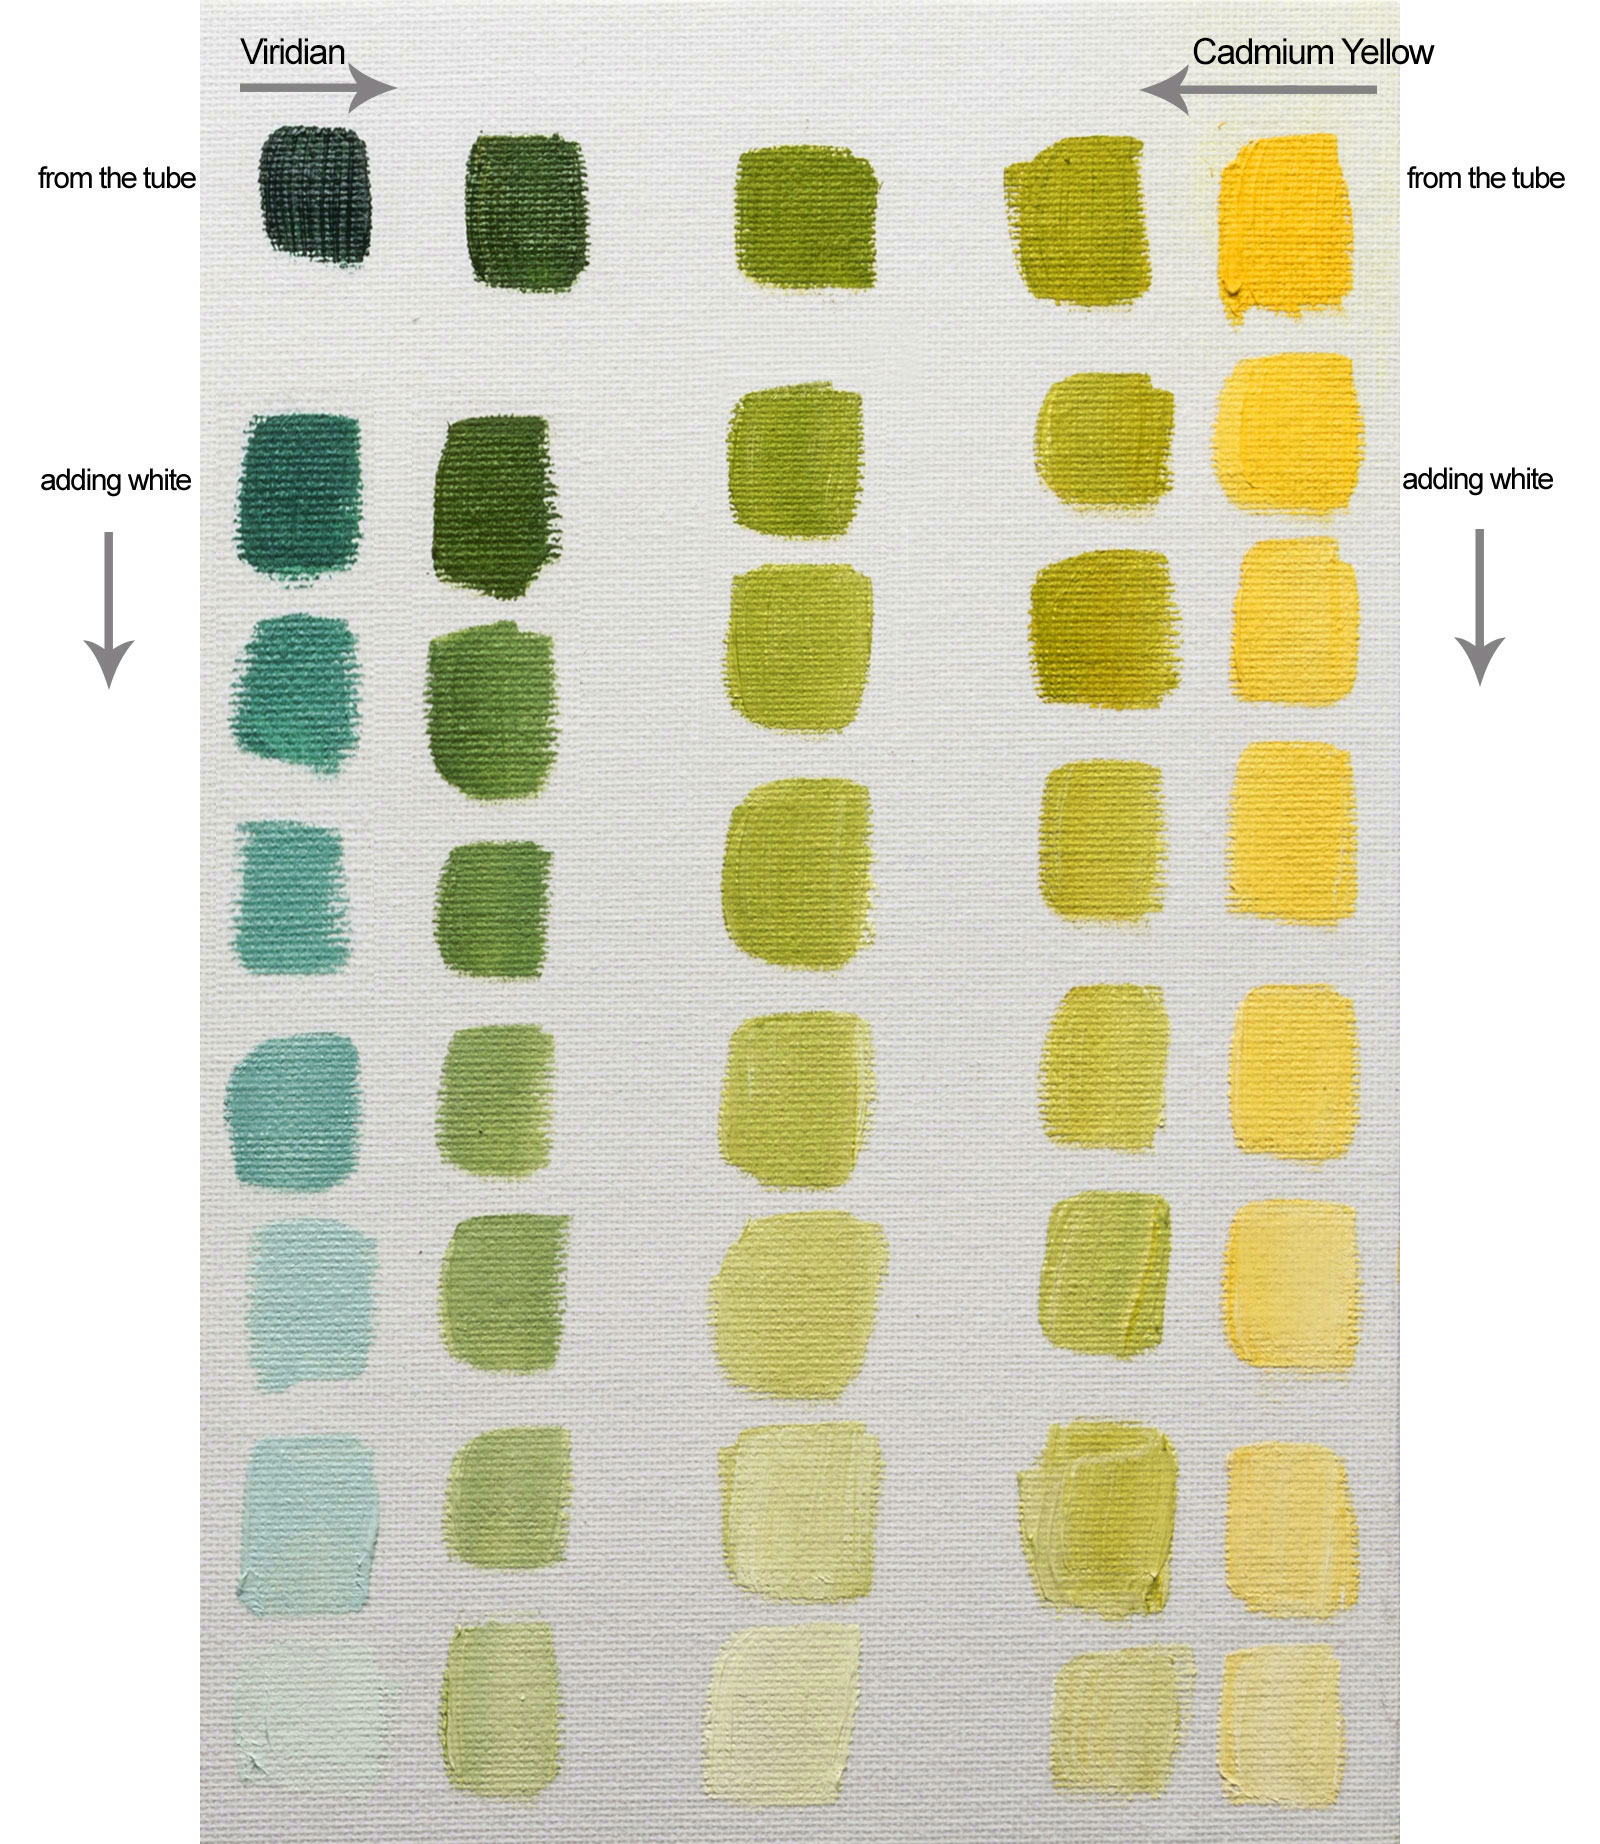 Williamsburg Paint Color Chart